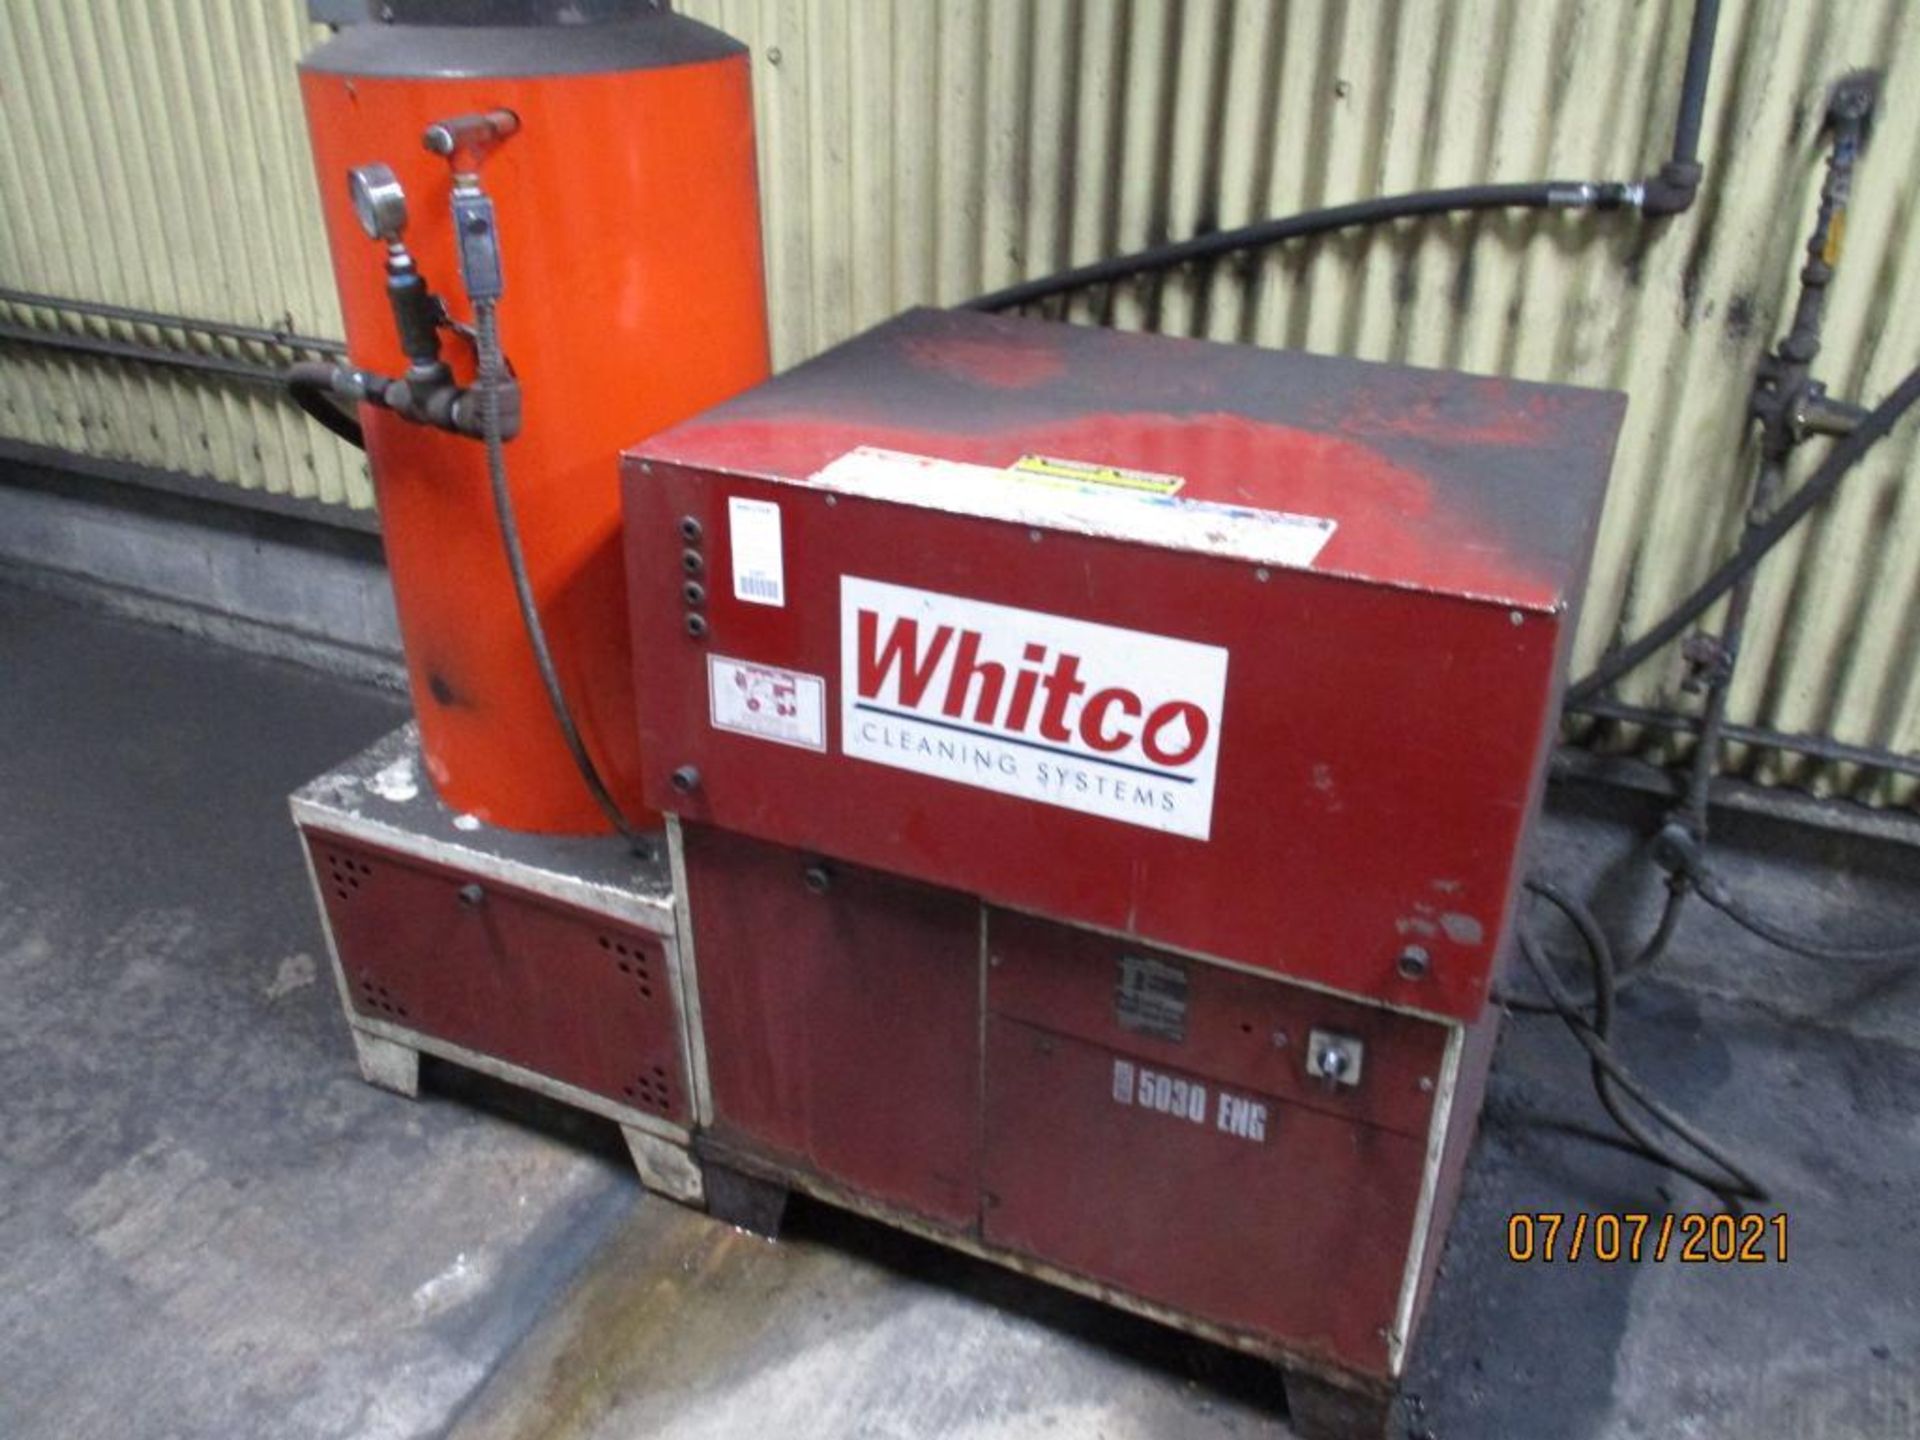 Whitco 5030ENG Cleaning System